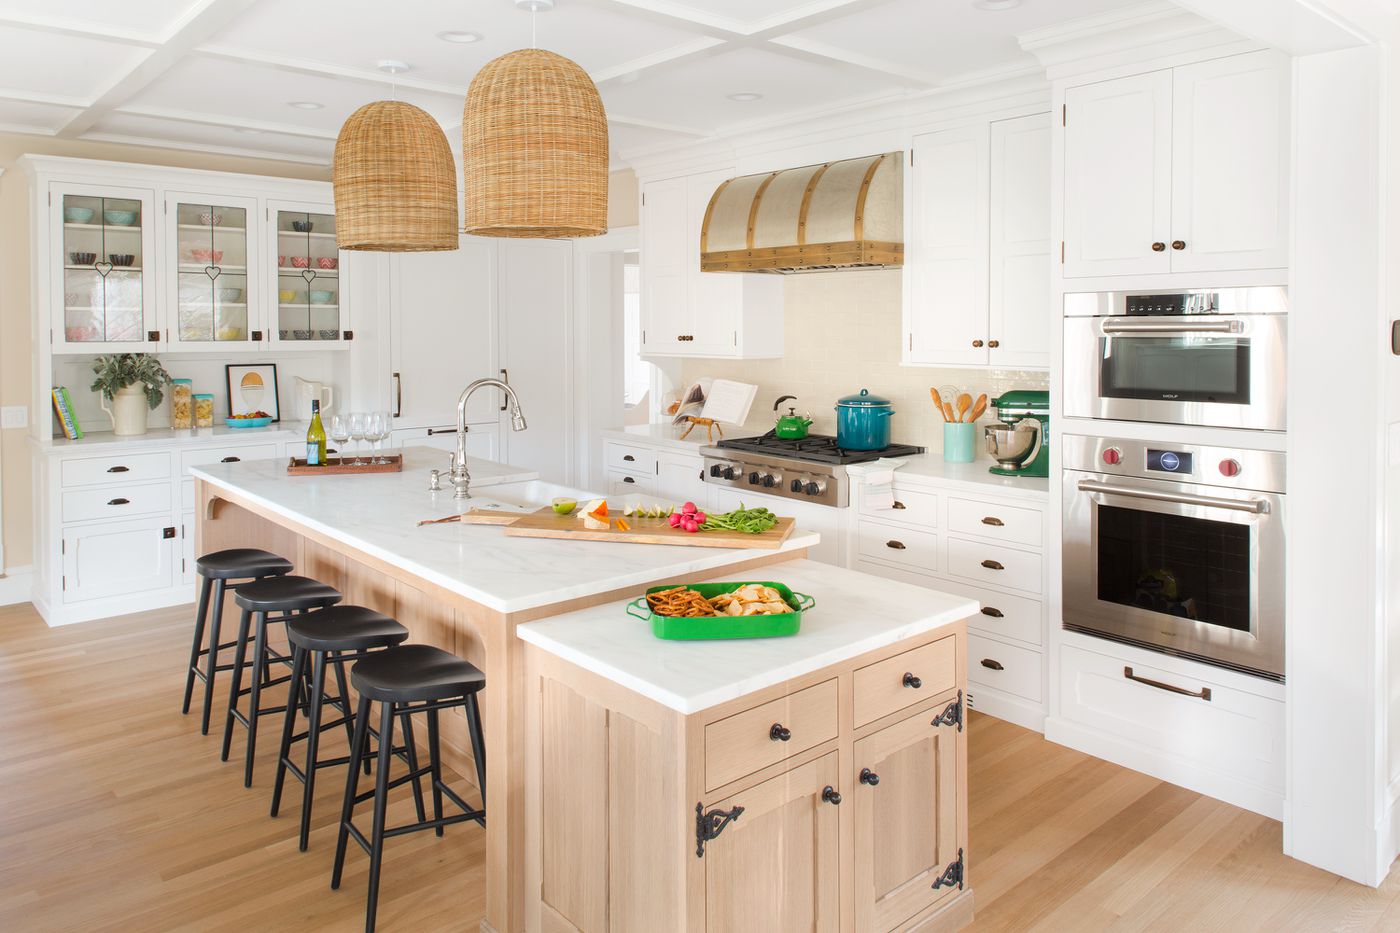 Read This Before Hiring a Kitchen Designer   This Old House